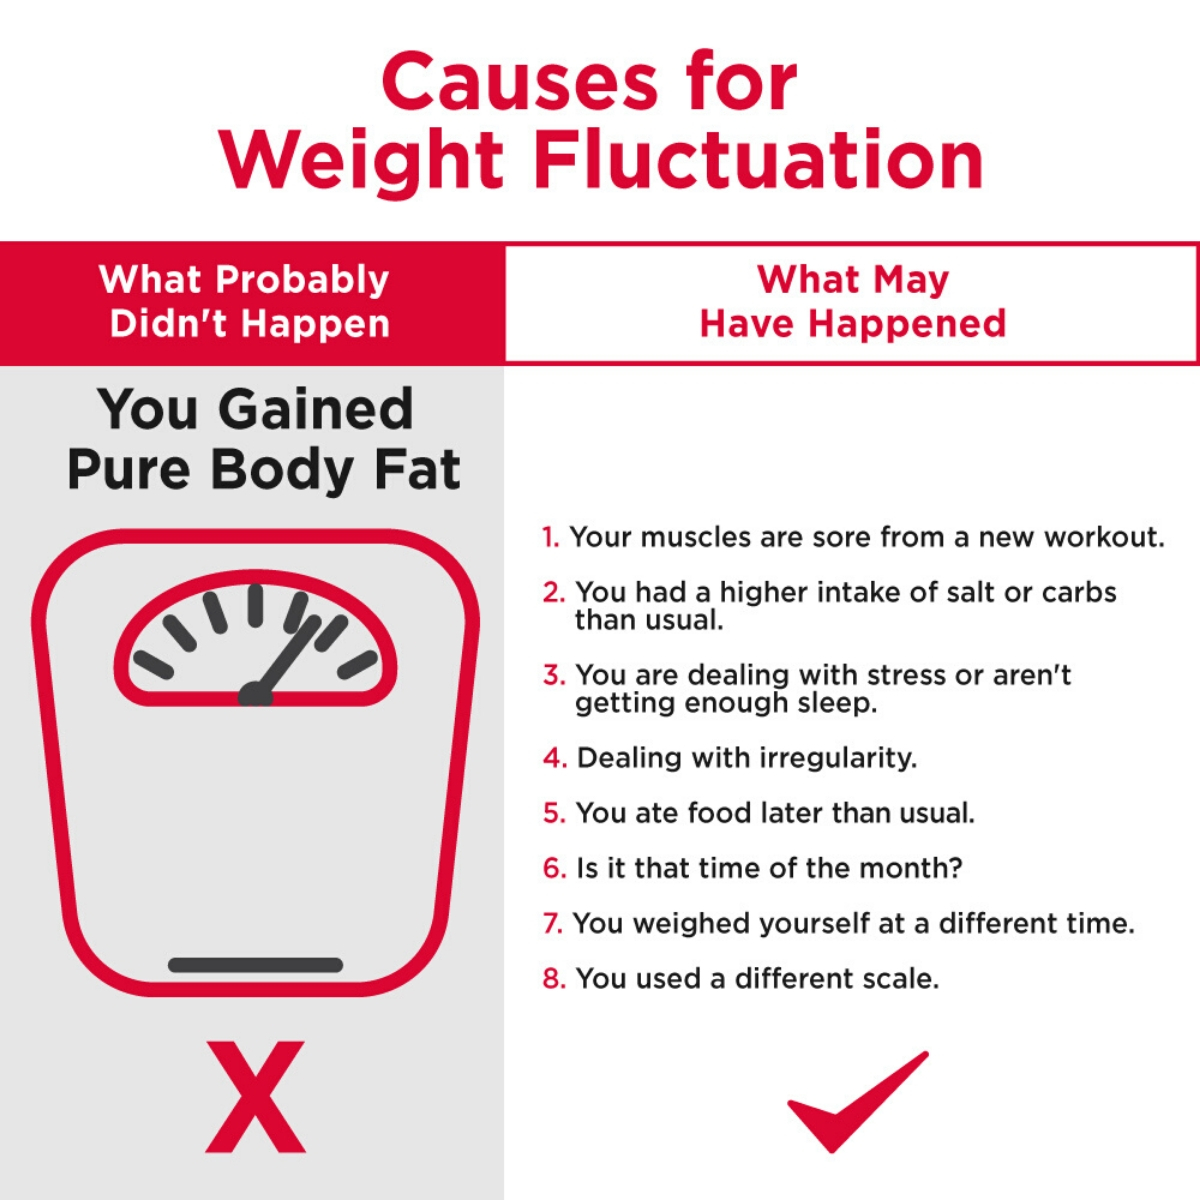 Causes for Weight Fluctuation